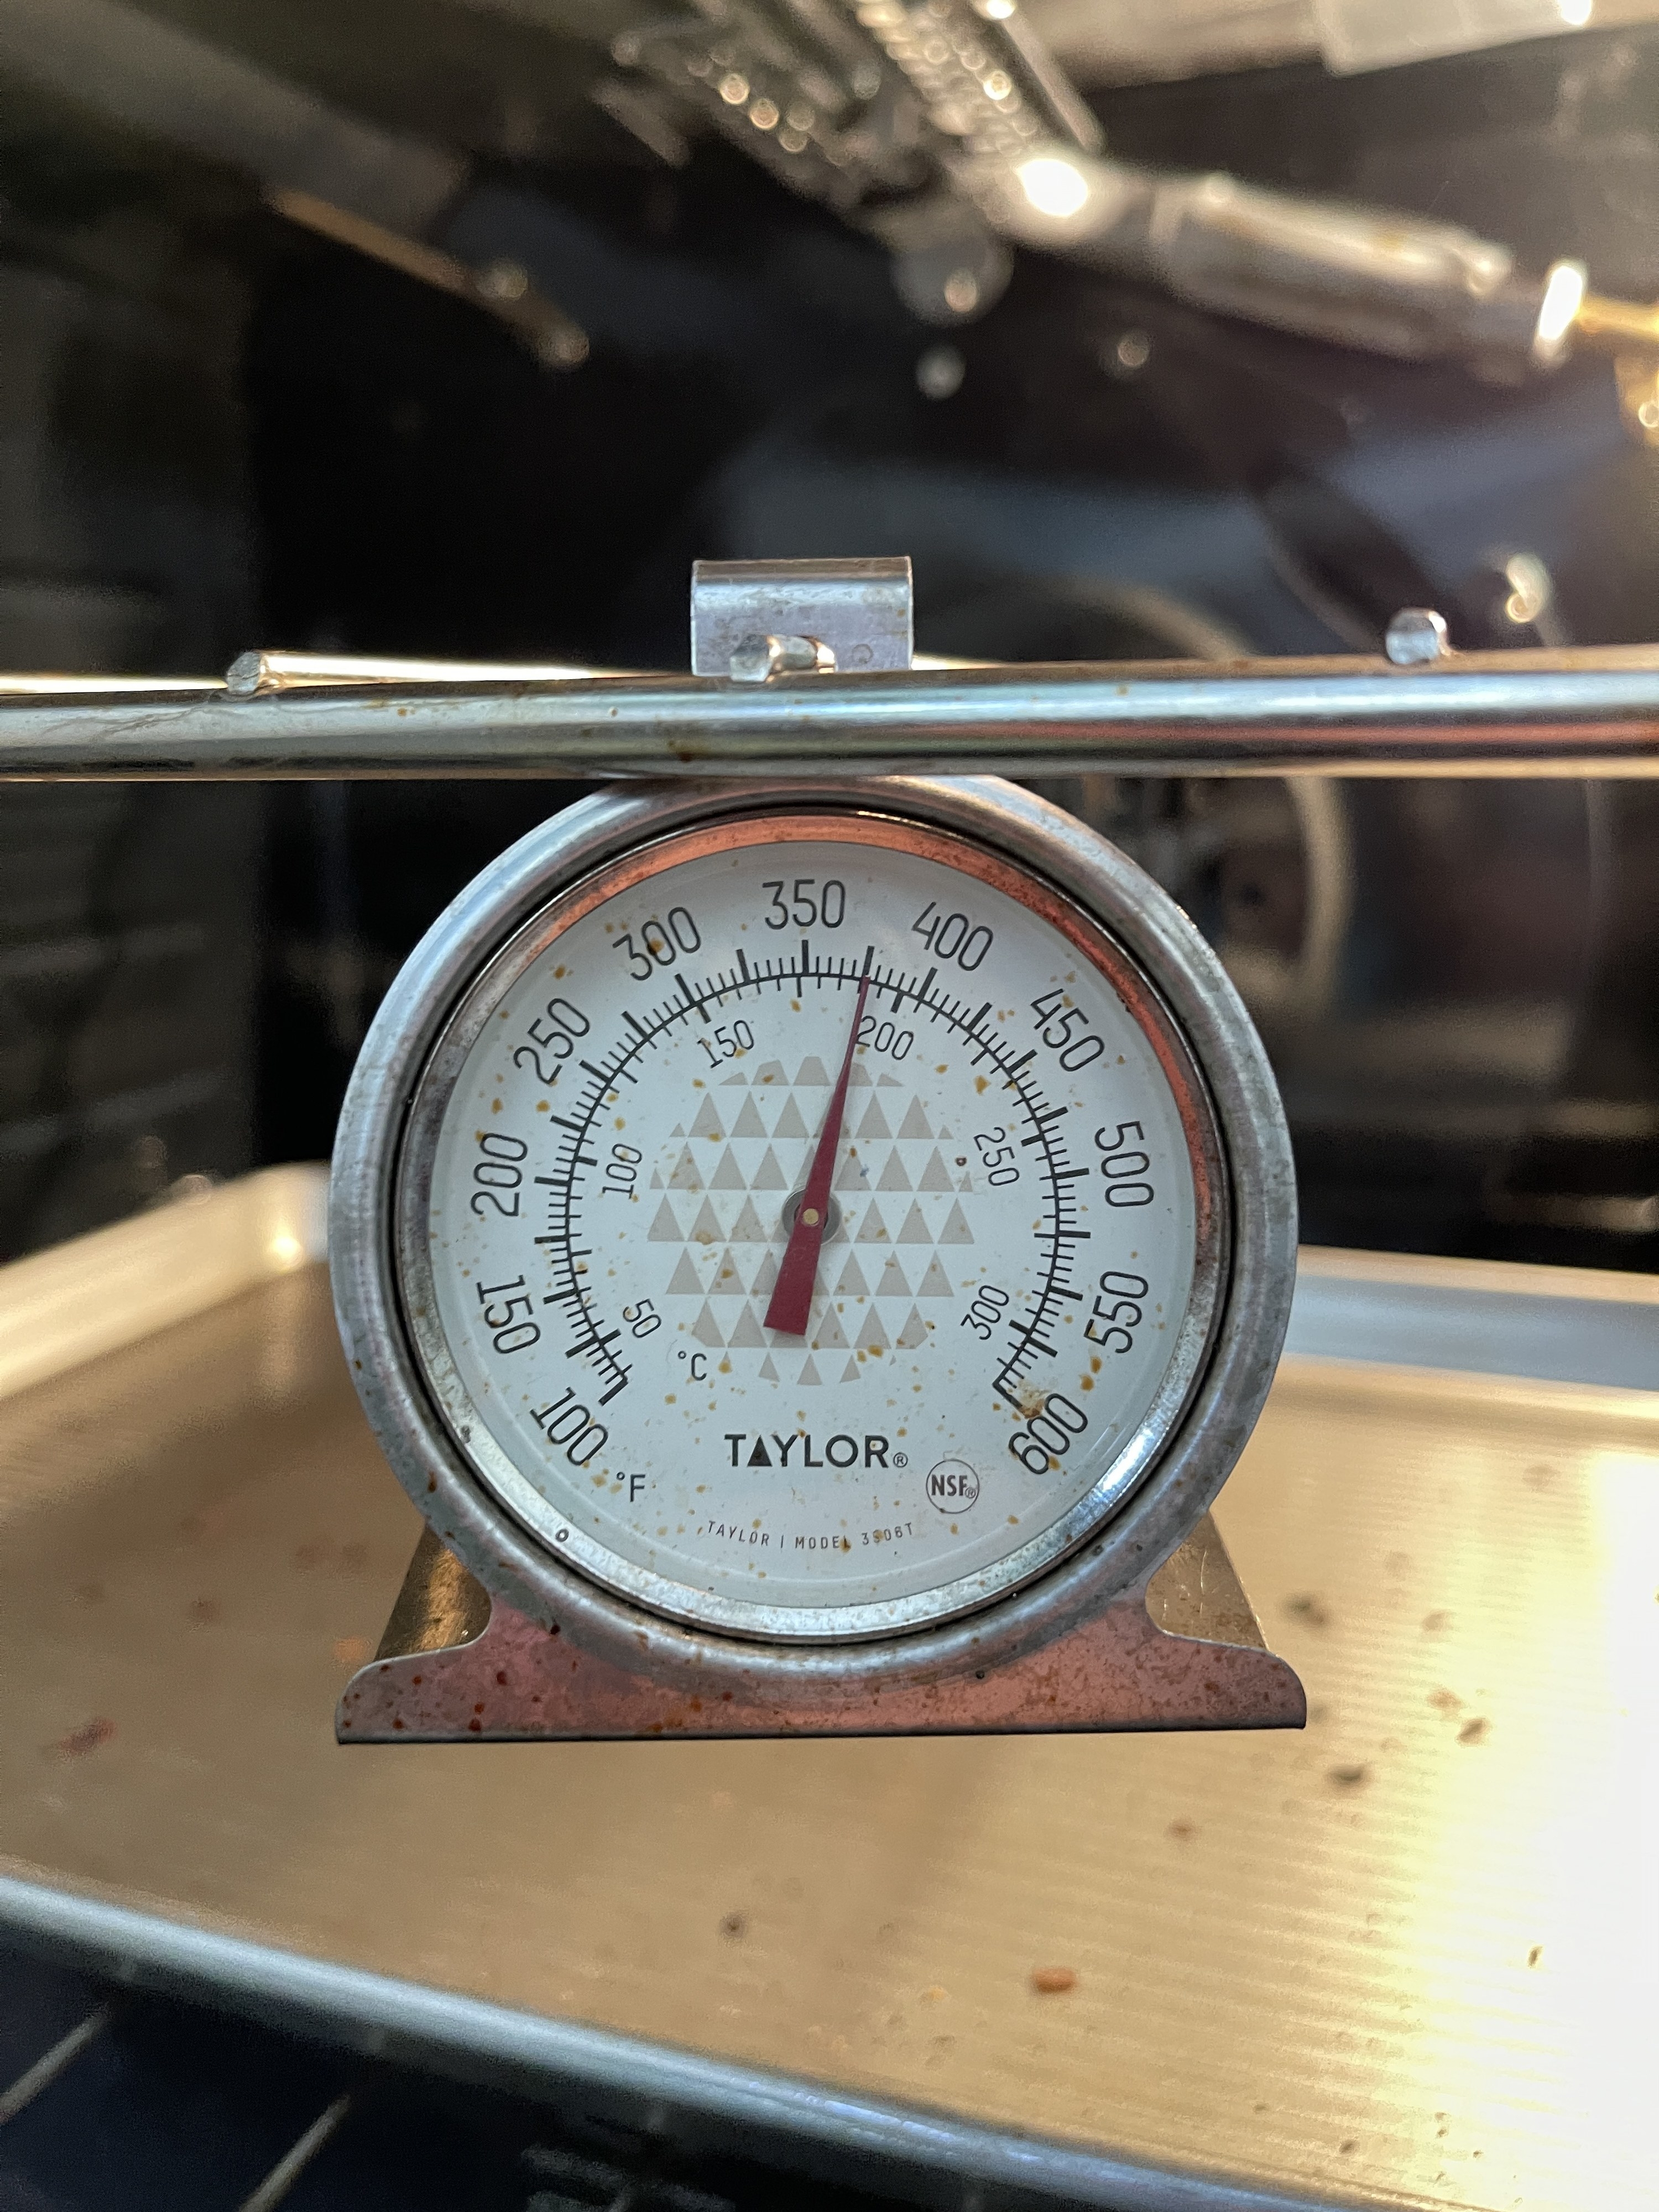 Oven thermometer registering at 375º